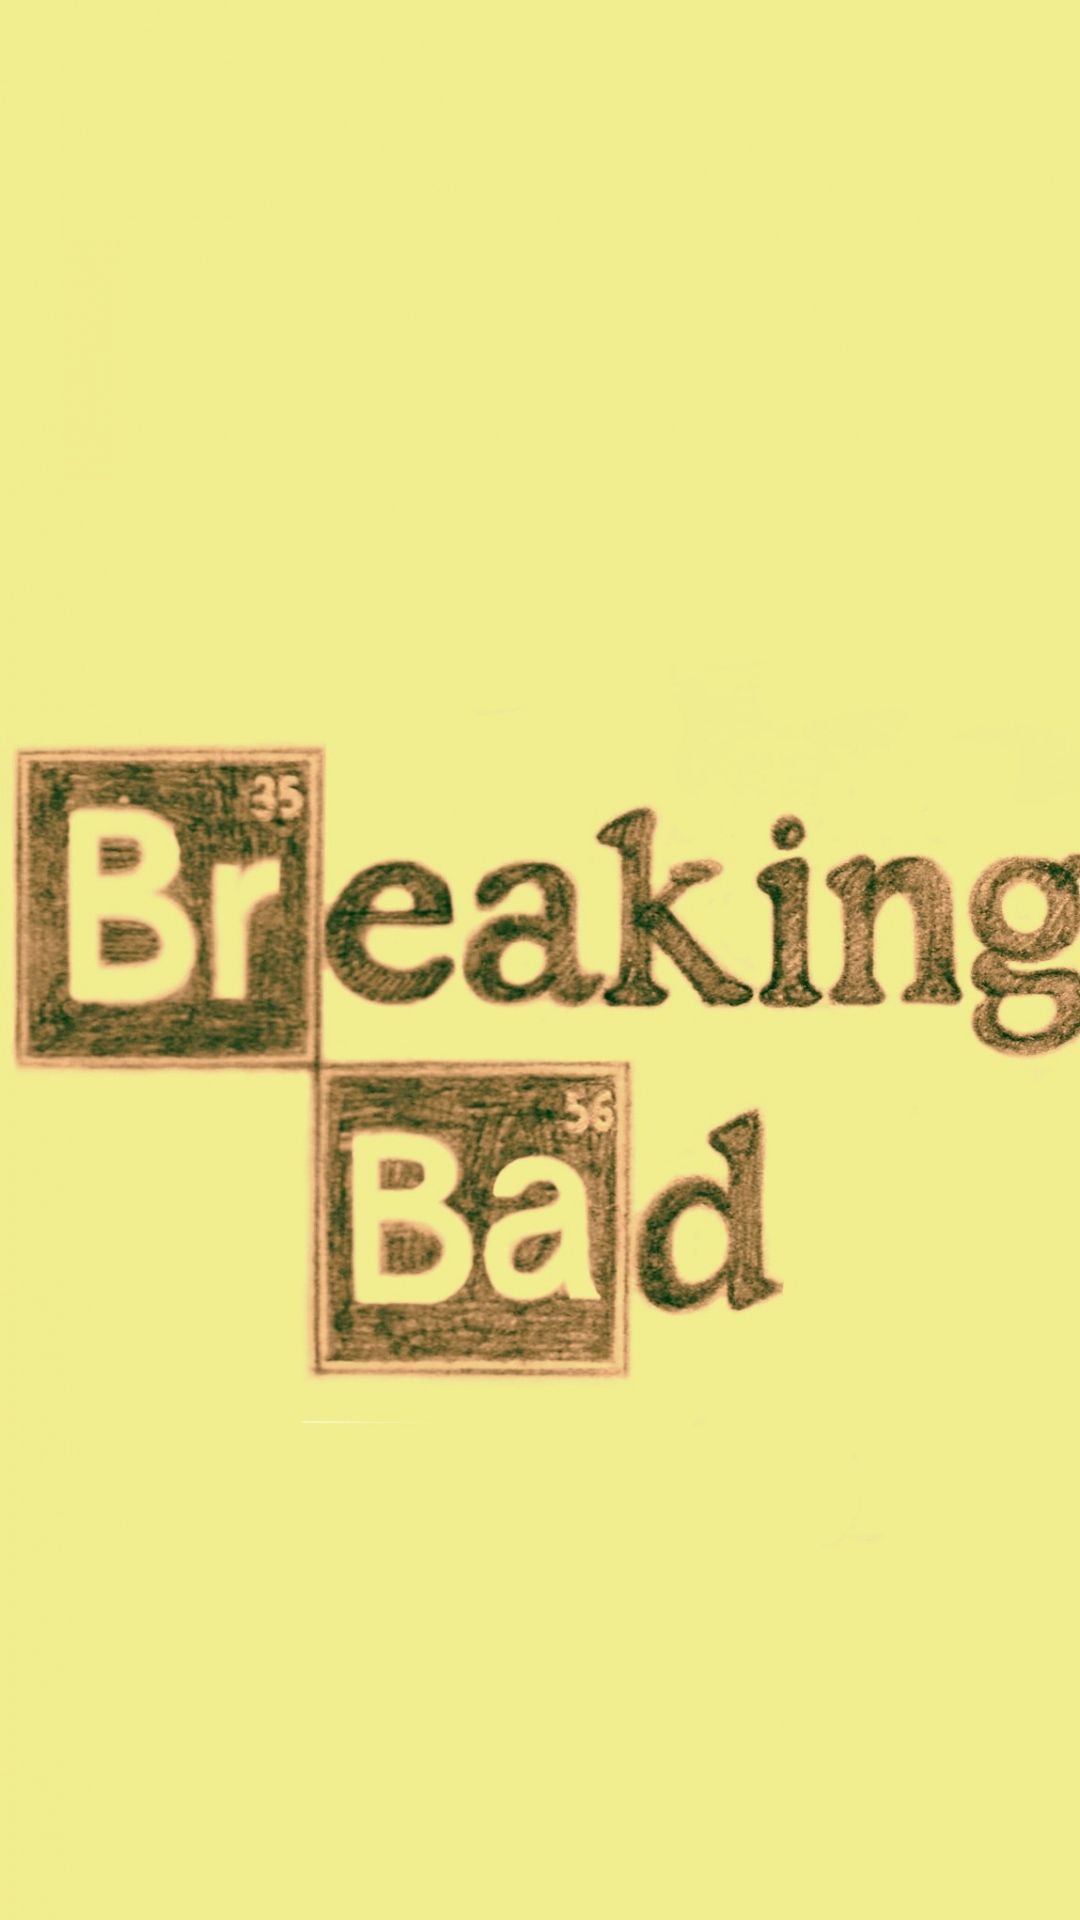 Breaking Bad Wallpaper for iPhone Free Download